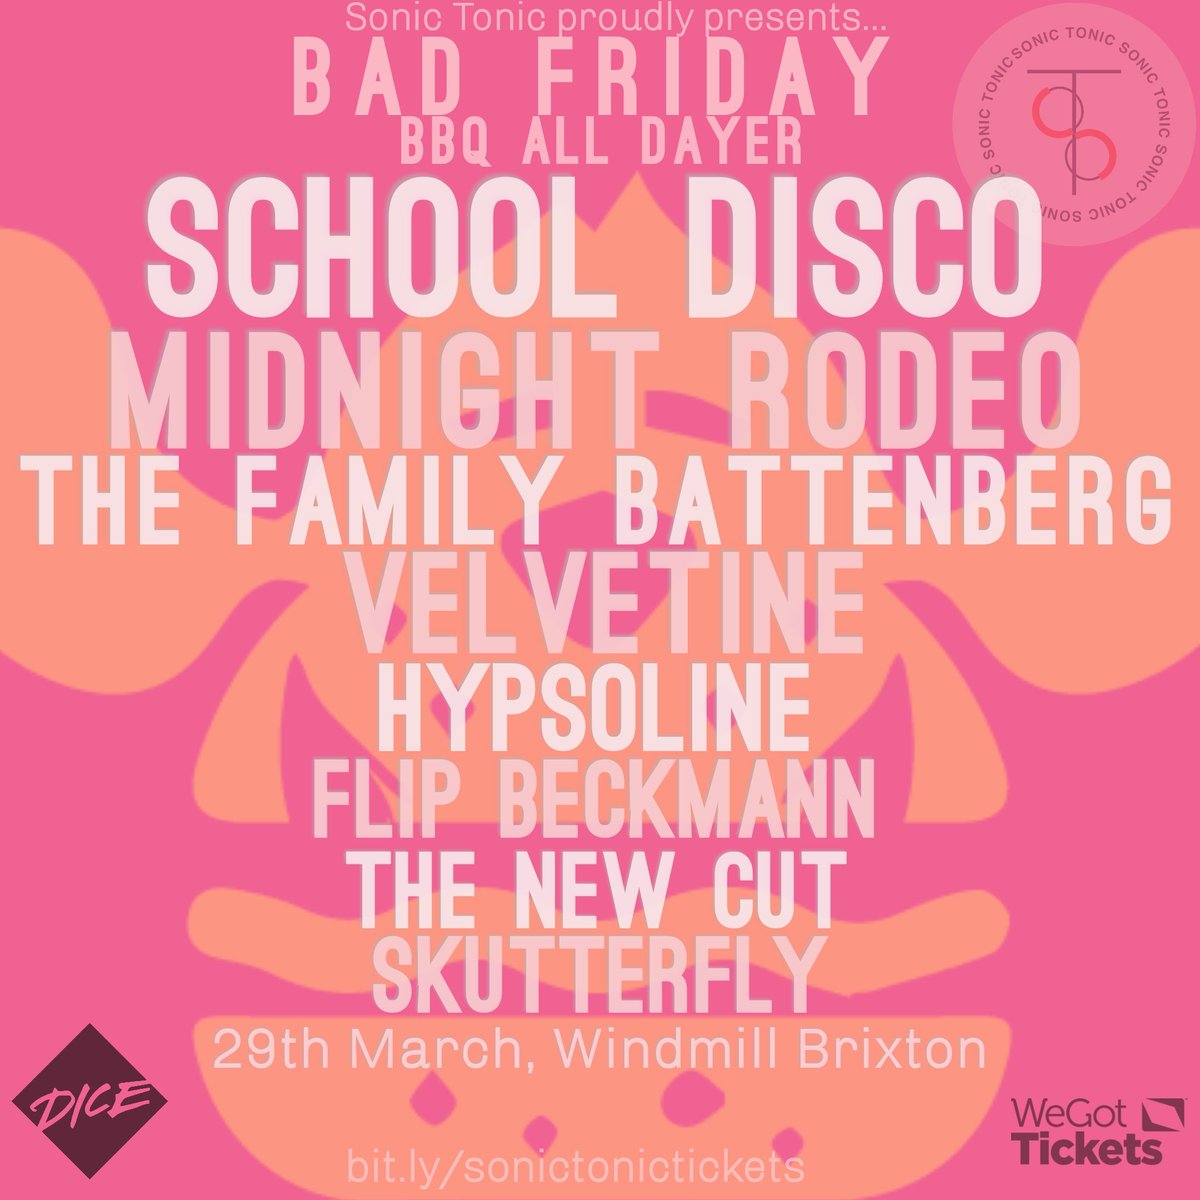 Pleased to announce our Bad Friday all-dayer! 💥 Tickets on sale now!